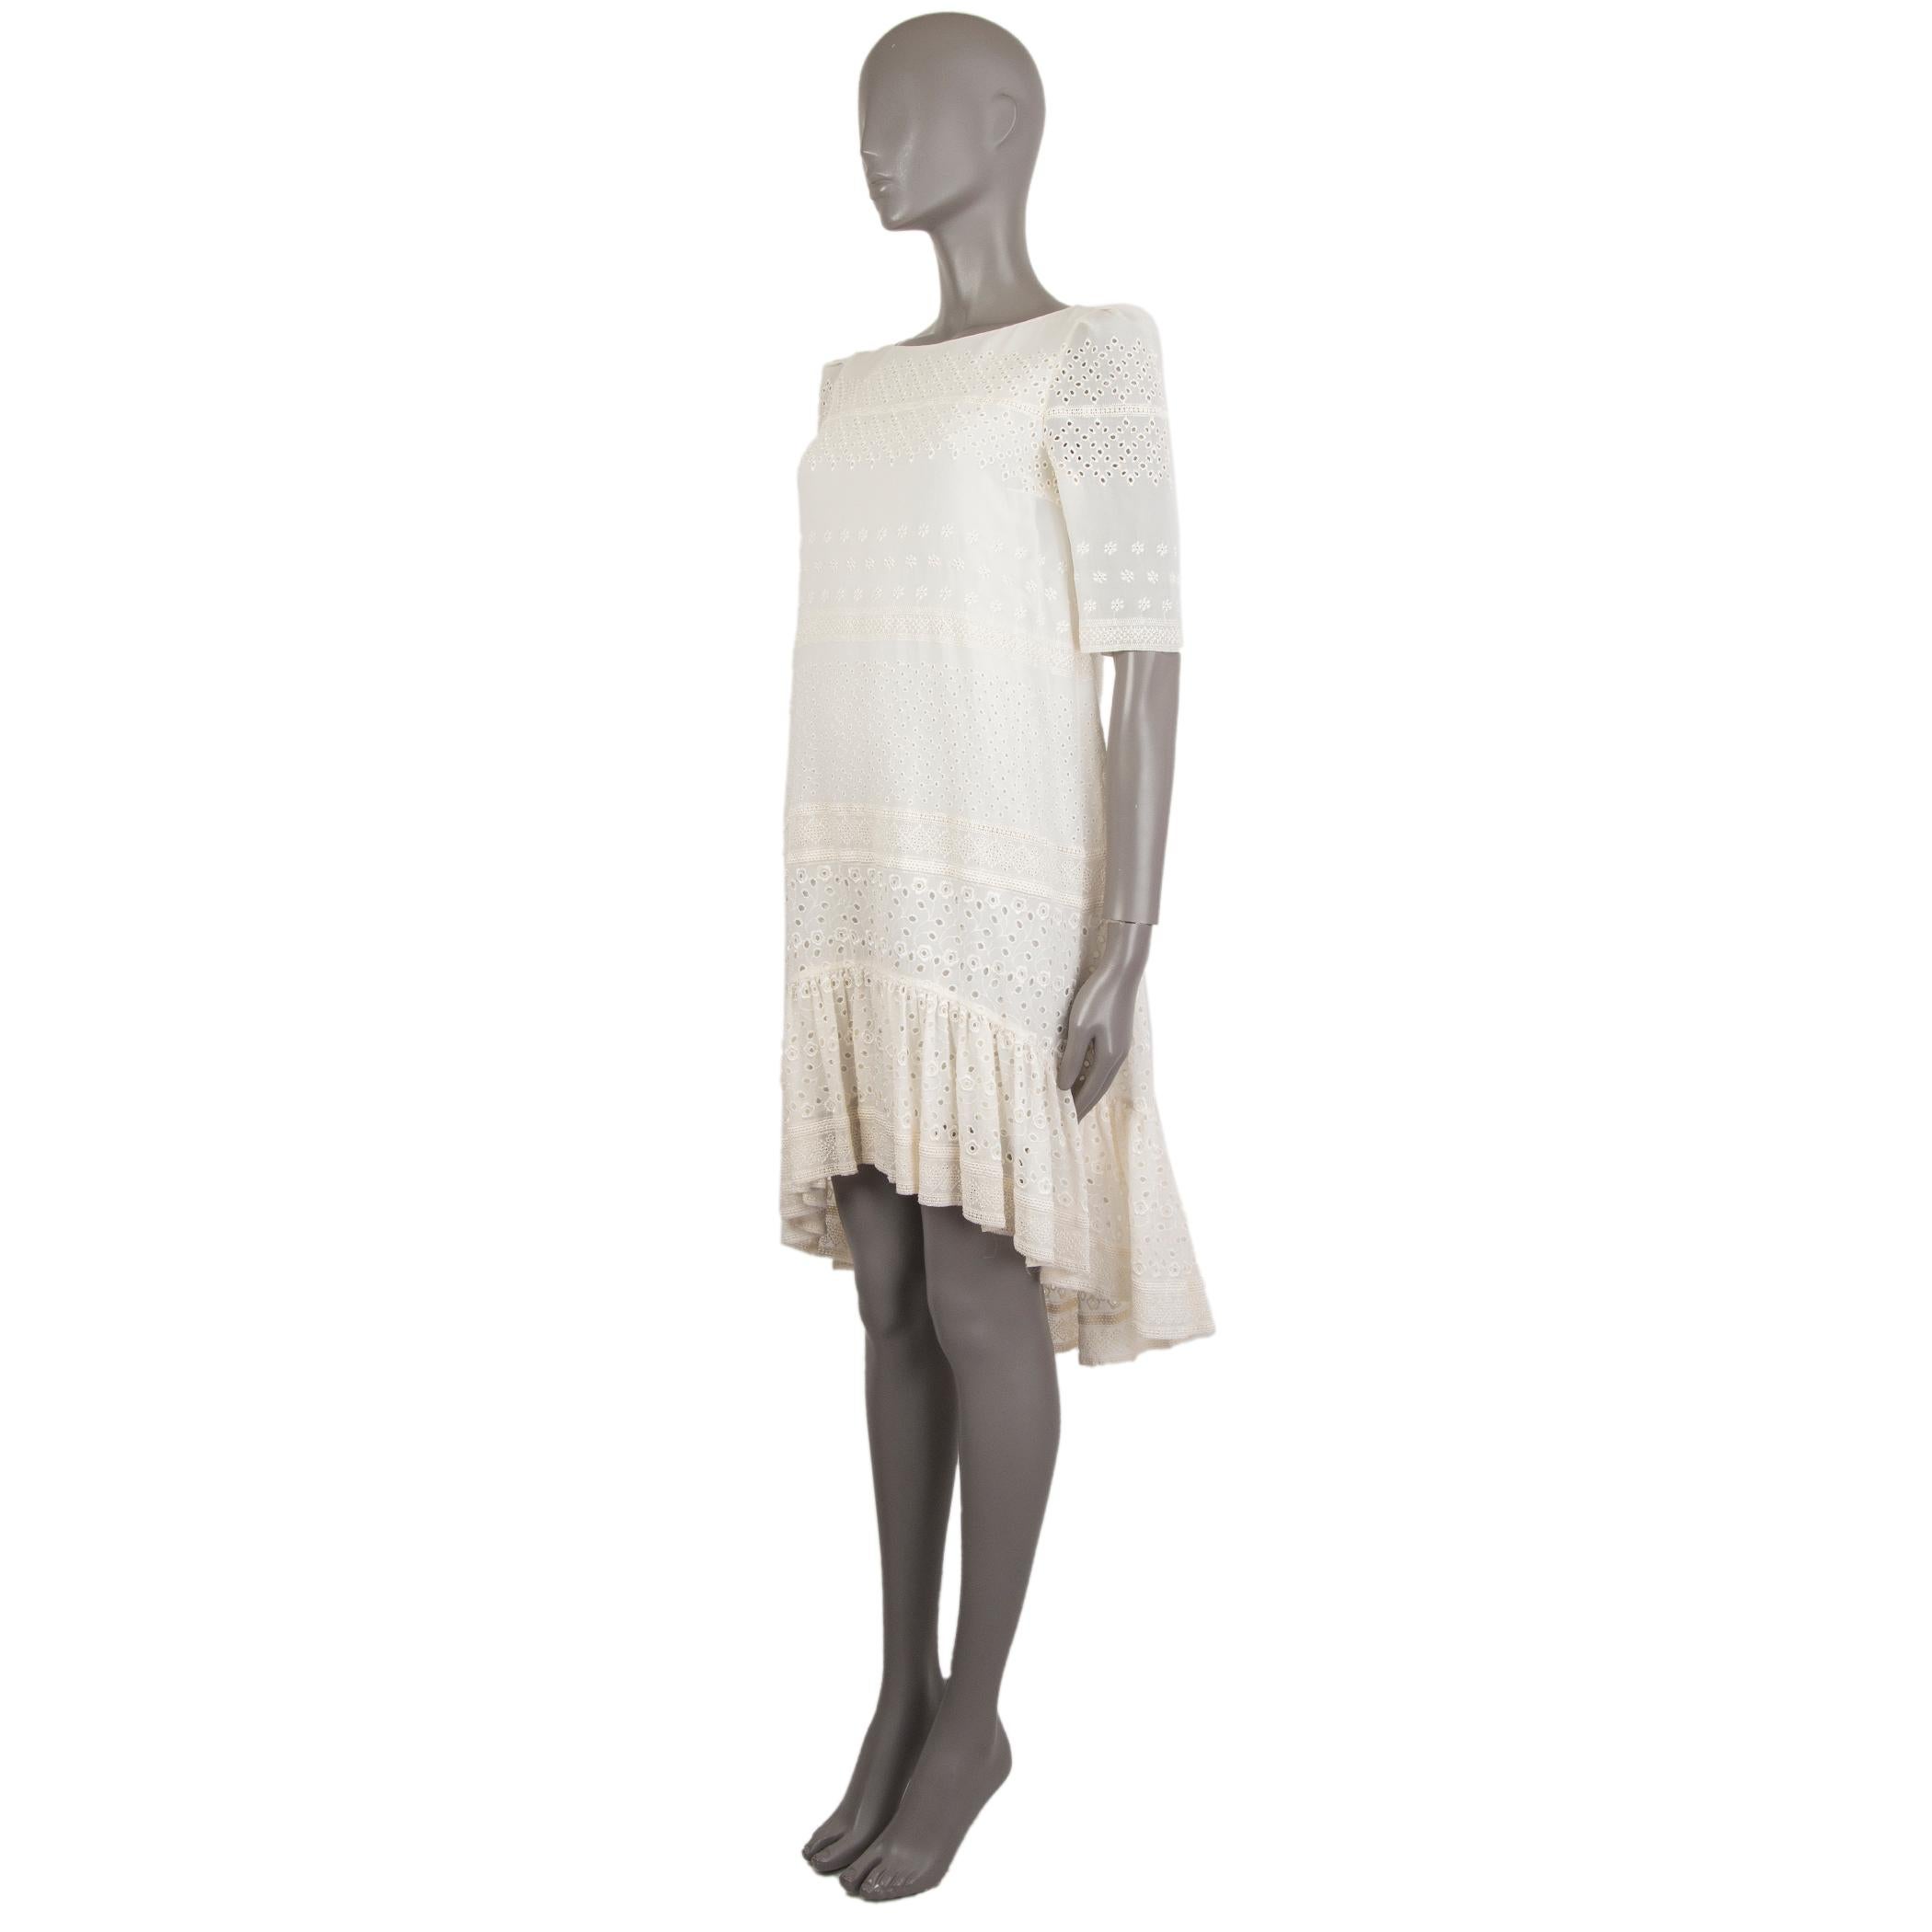 Saint Laurent 3/4-sleeve ebroidered-lace shift dress in off-white silk (48%), viscose (42%), and cotton (10%). With round neck and ruffled hemline. Lined in off-white silk (100%). Has been worn and is in excellent condition. 

Tag Size 36
Size